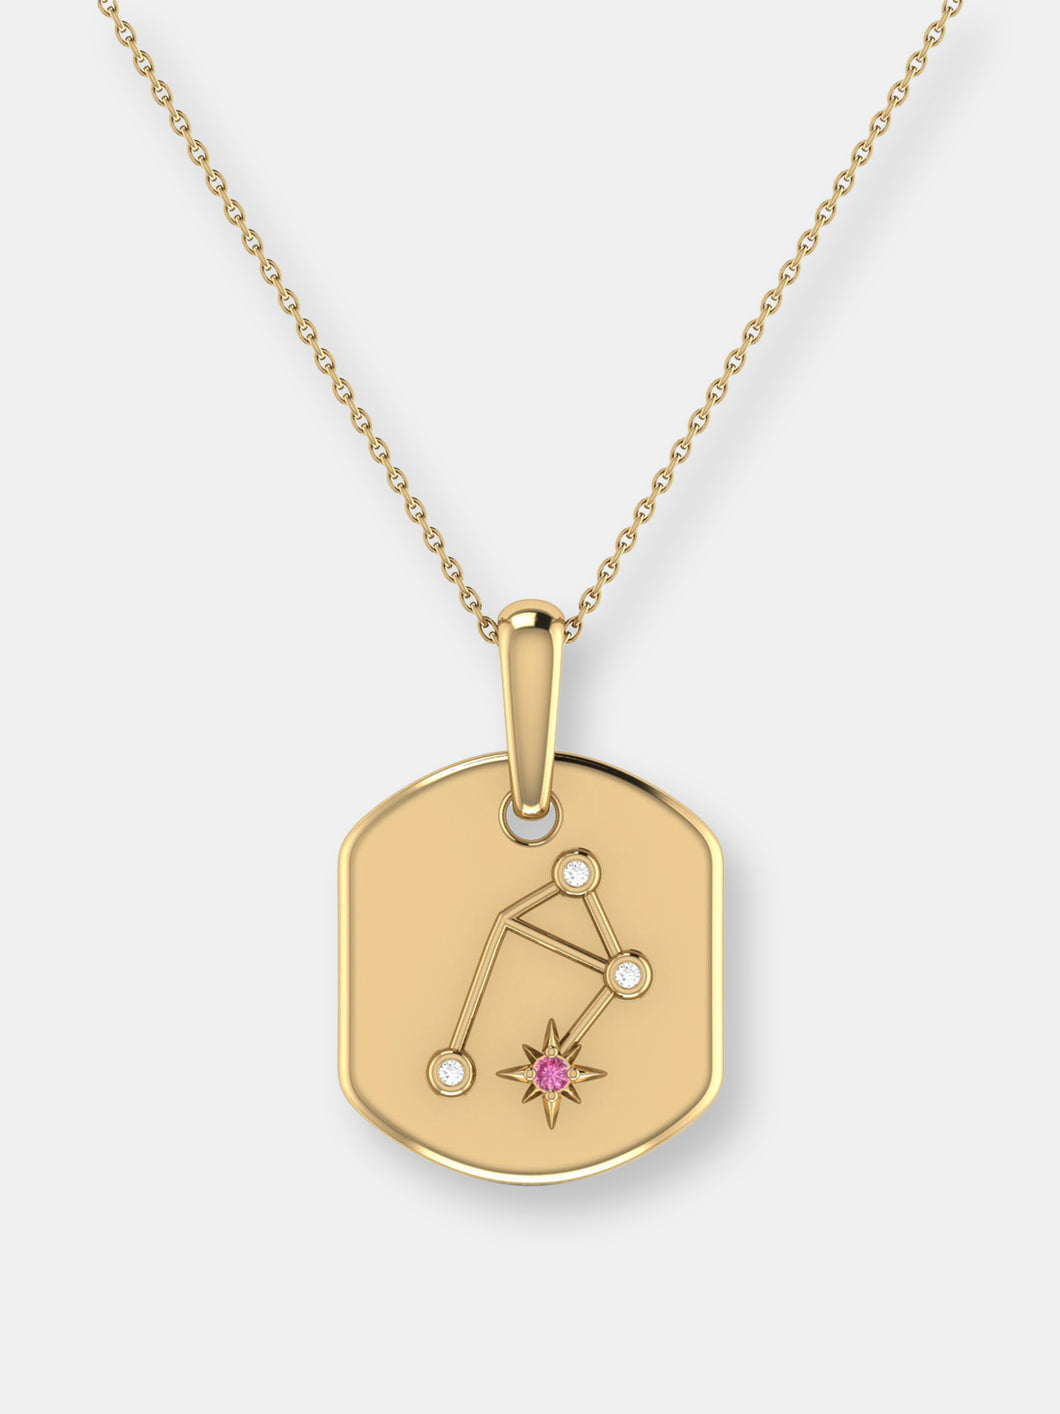 Libra Scales Pink Tourmaline & Diamond Constellation Tag Pendant Necklace in 14K Yellow Gold Vermeil on Sterling Silver